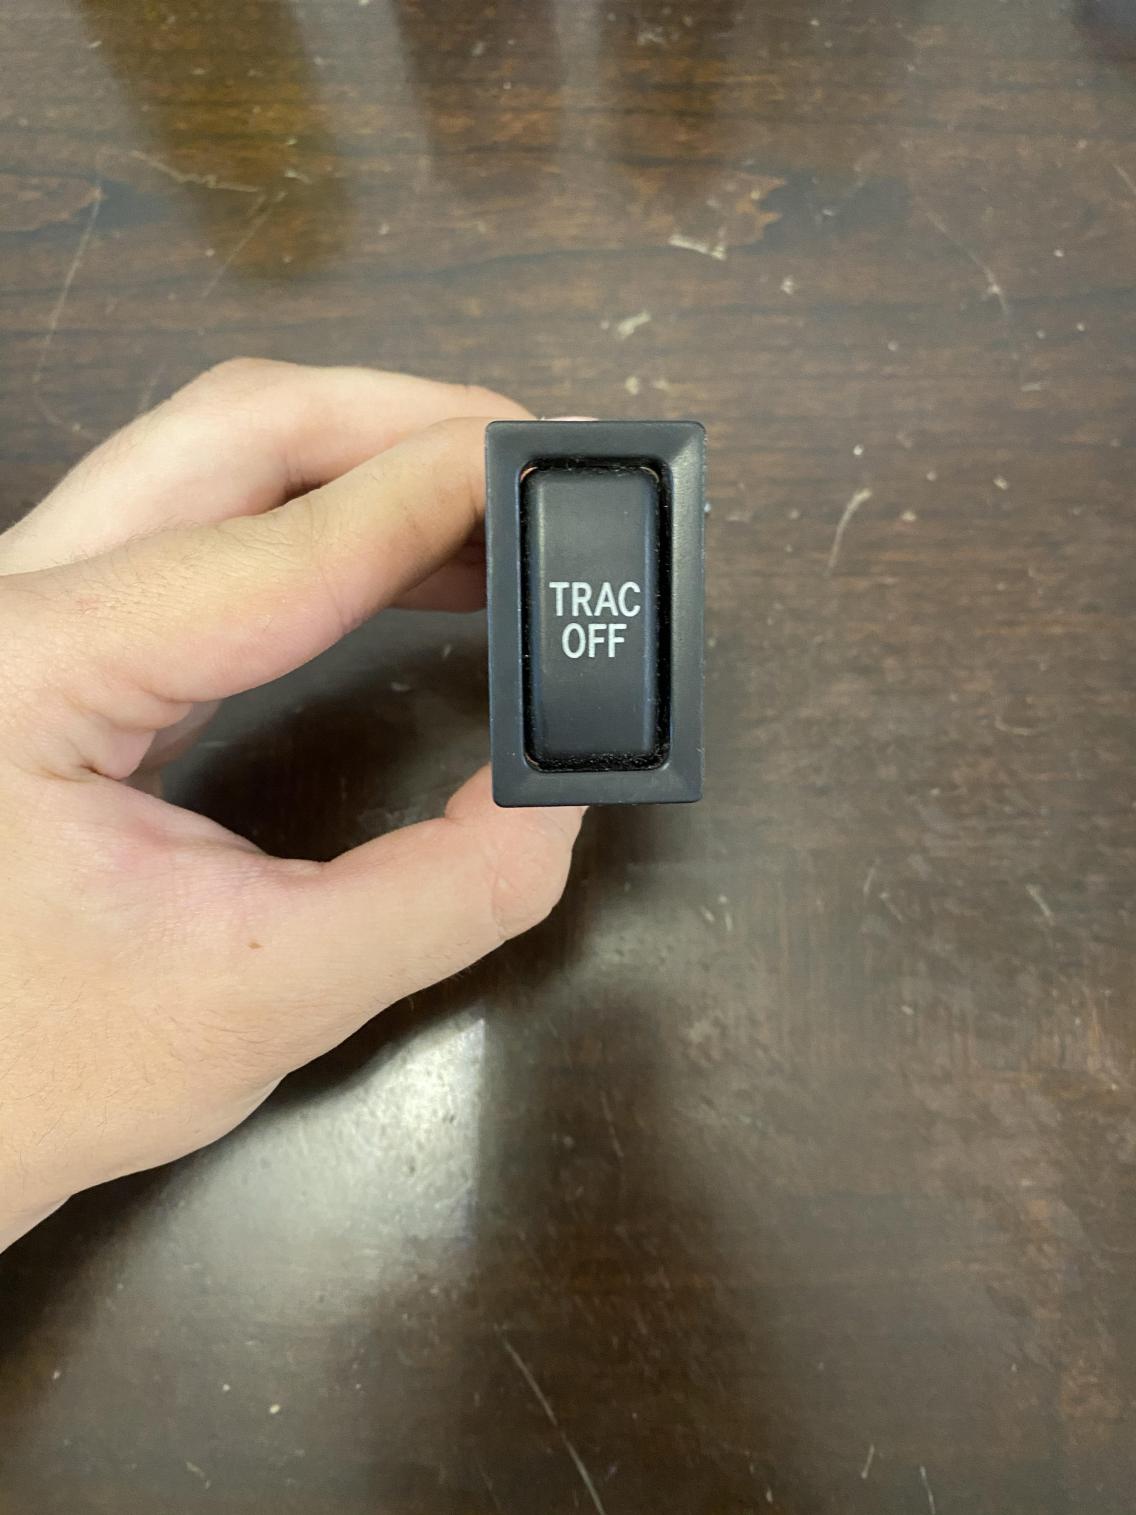 For sale: OEM 2001 4Runner Traction Off Switch-tracoff-jpg